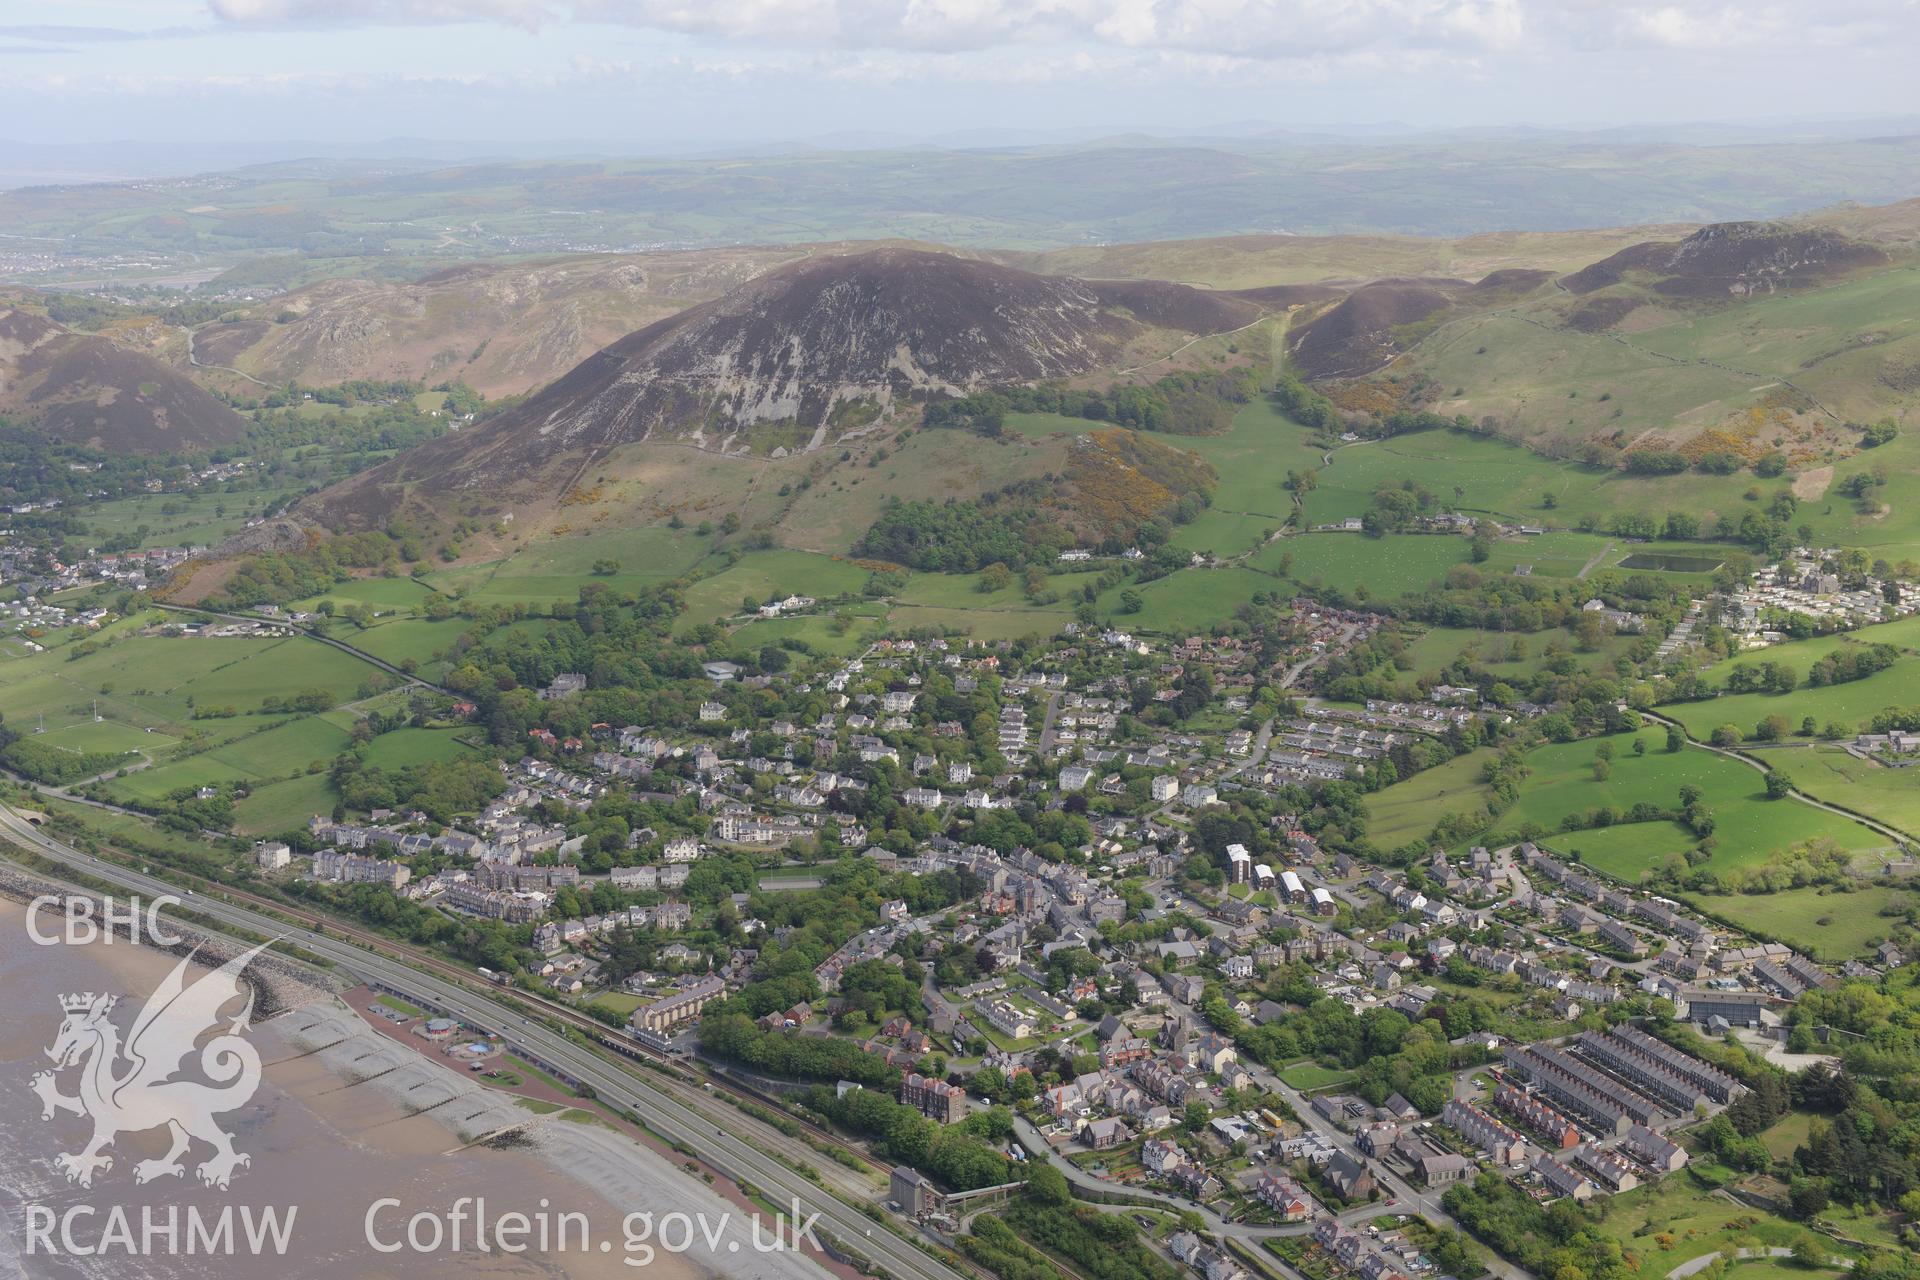 Penmaenmawr town with Foel Lus cairn at the top of the hill beyond. Oblique aerial photograph taken during the Royal Commission?s programme of archaeological aerial reconnaissance by Toby Driver on 22 May 2013.